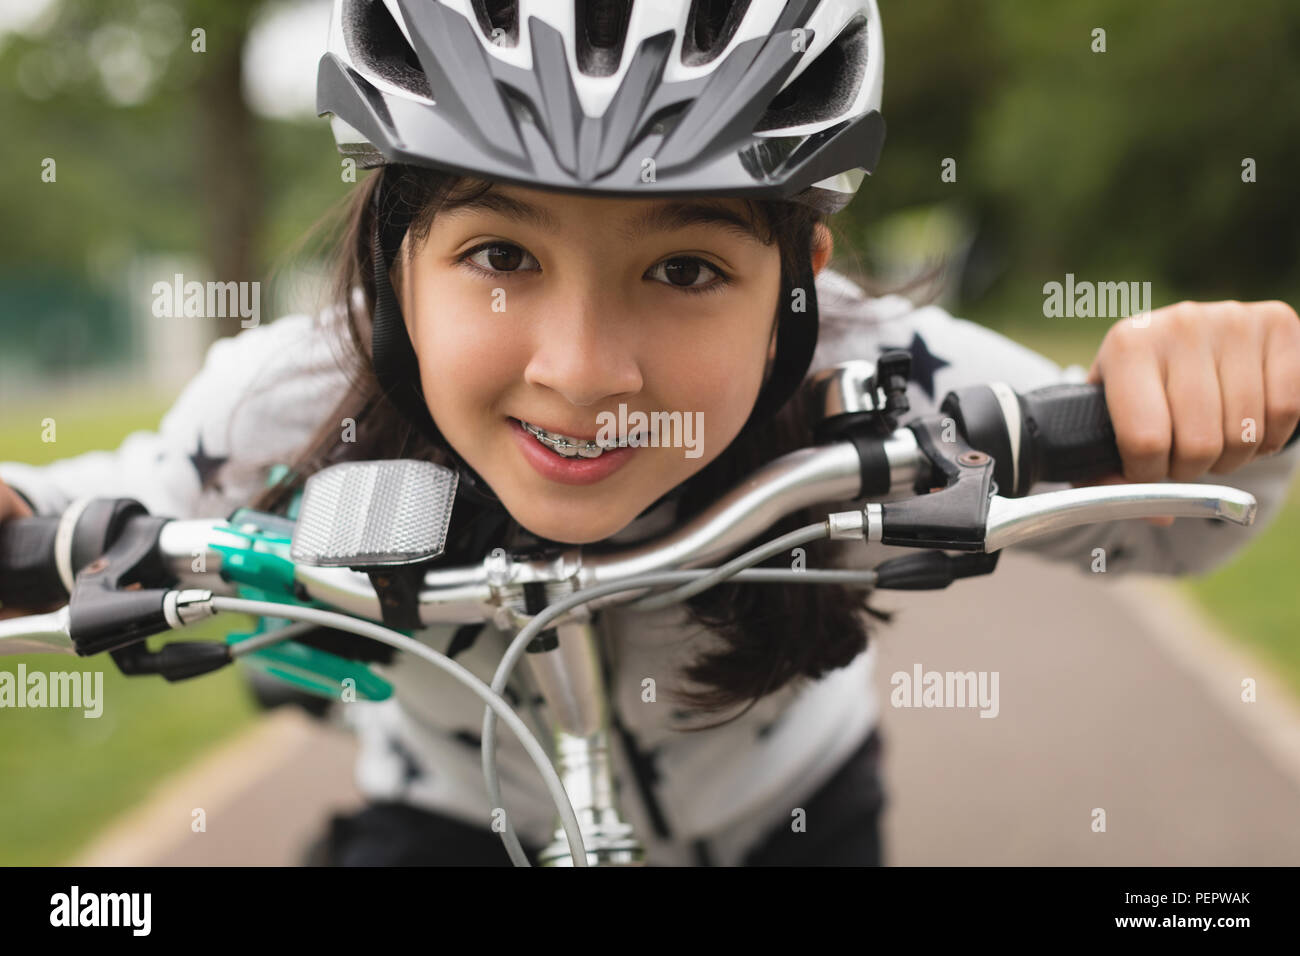 Girl riding bicycle on street Stock Photo